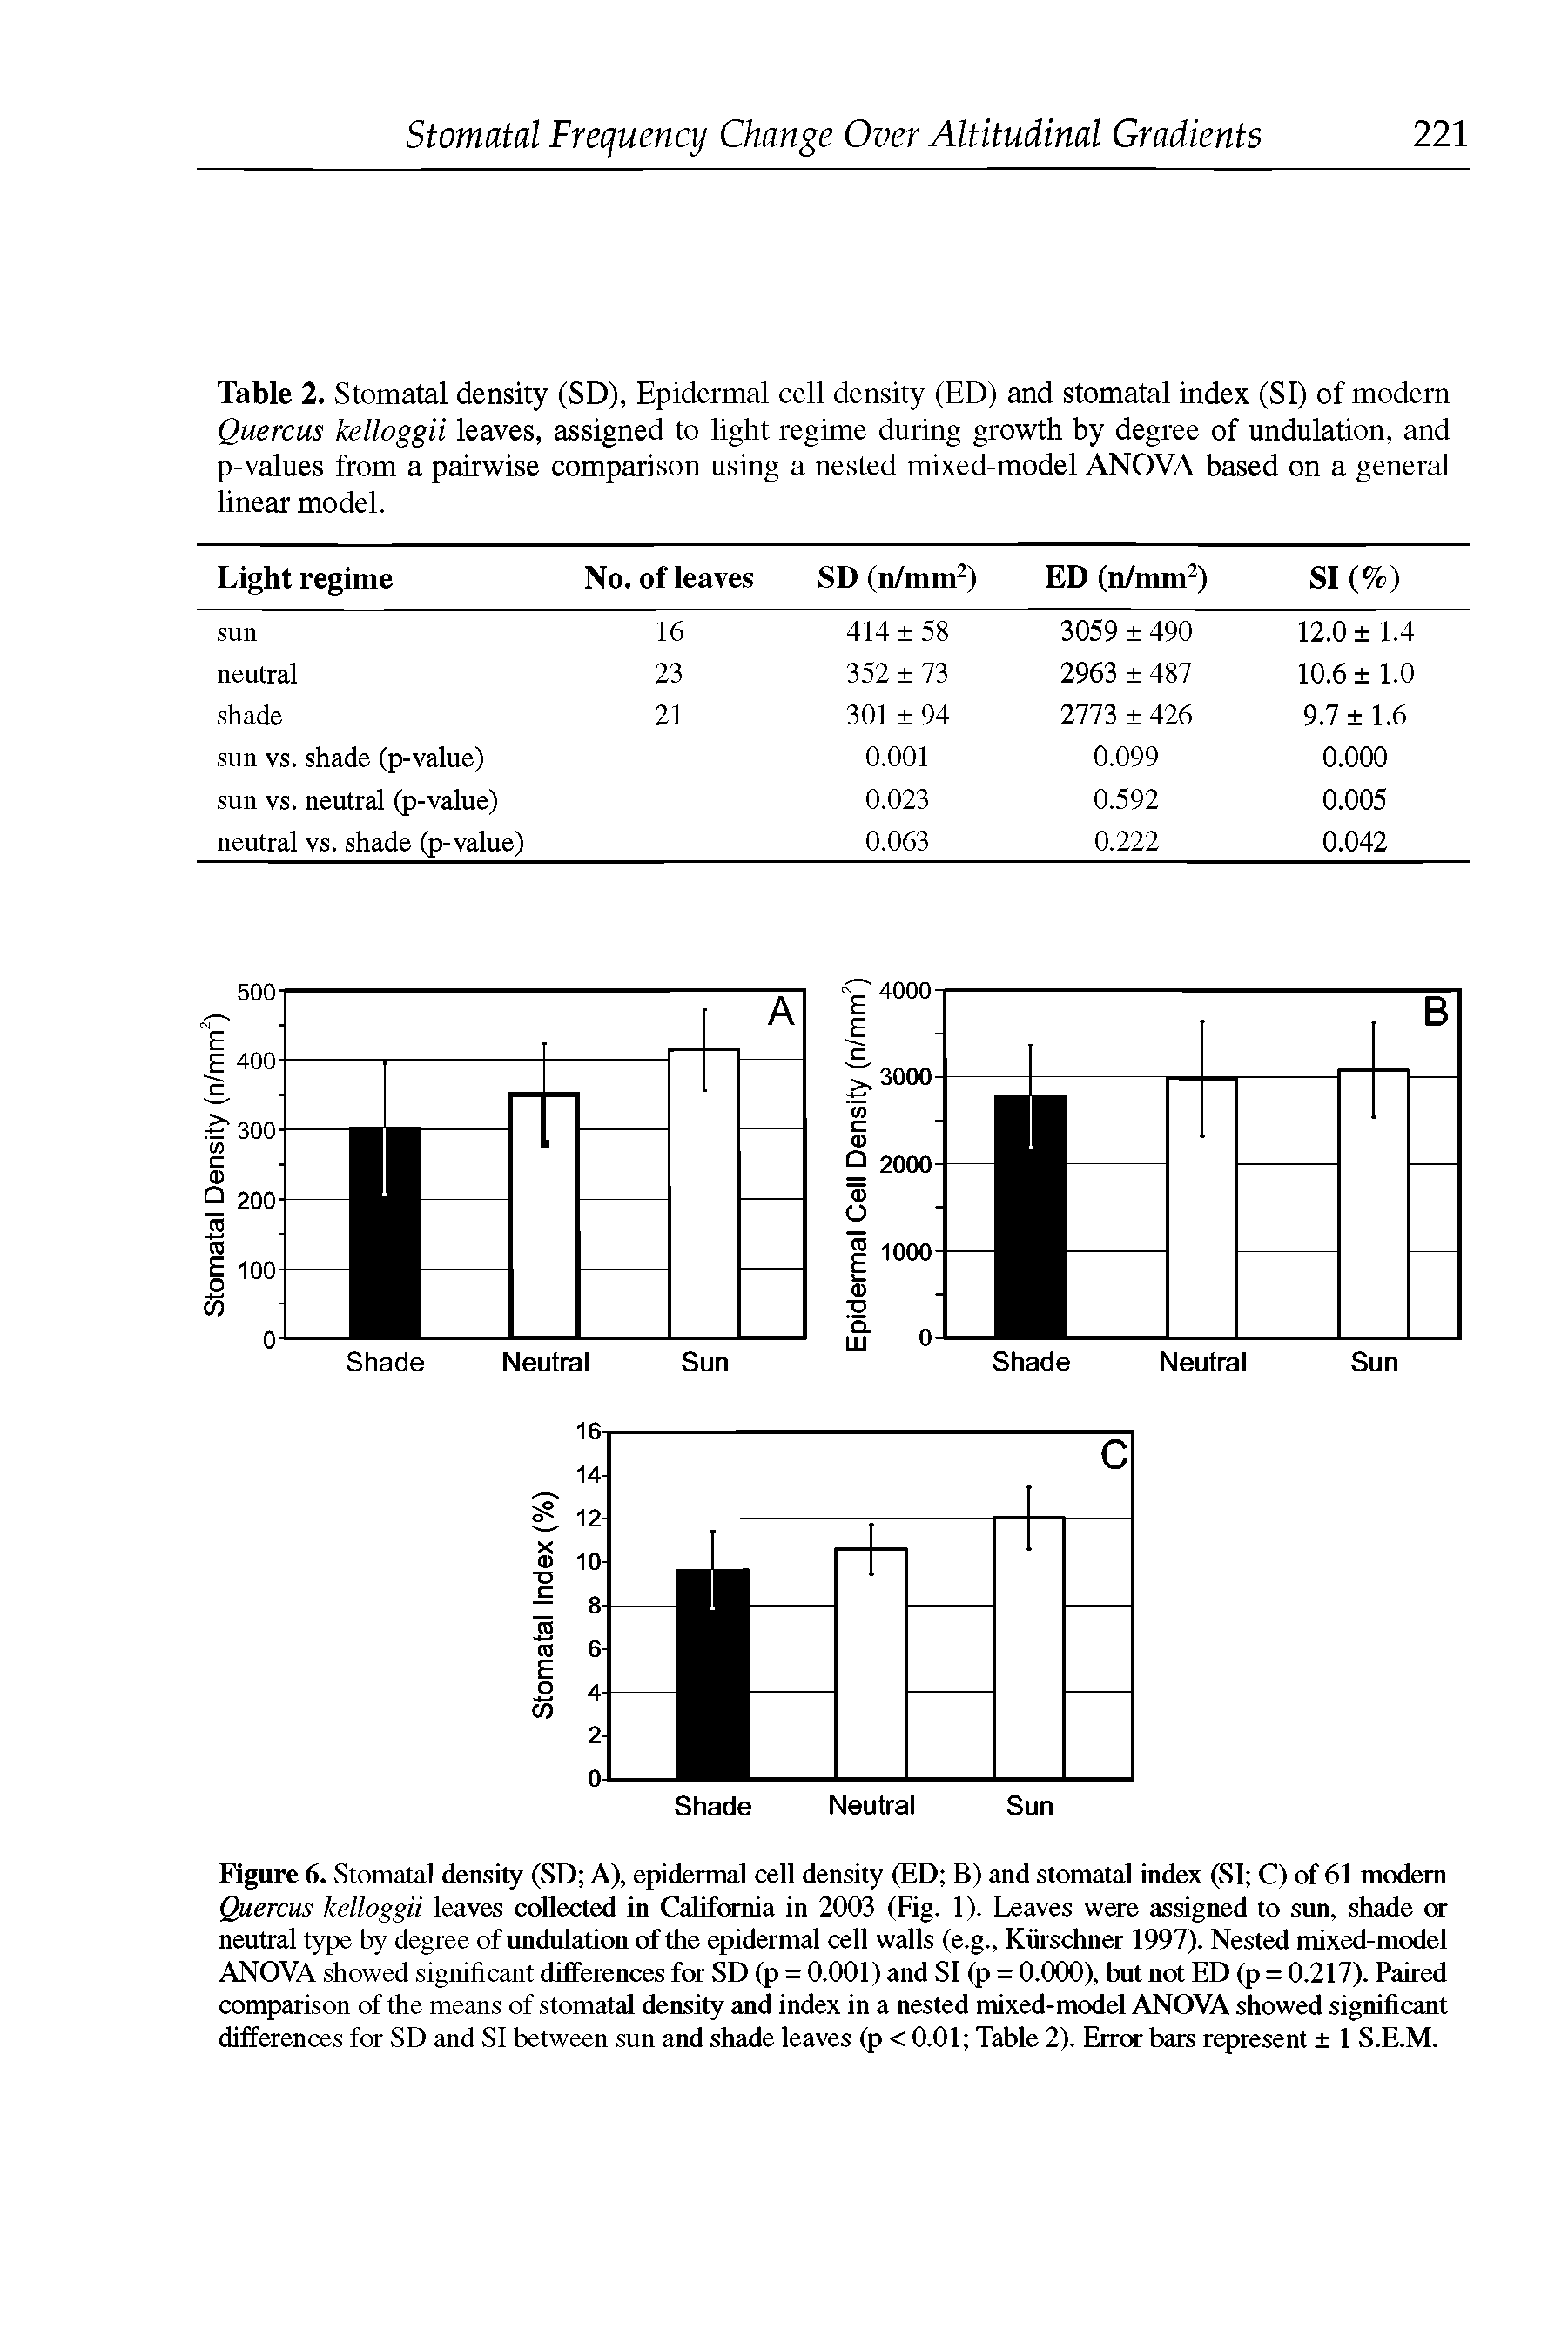 Table 2. Stomatal density (SD), Epidermal cell density (ED) and stomatal index (SI) of modern Quercus kelloggii leaves, assigned to light regime during growth by degree of undulation, and p-values from a pairwise comparison using a nested mixed-model ANOVA based on a general linear model.